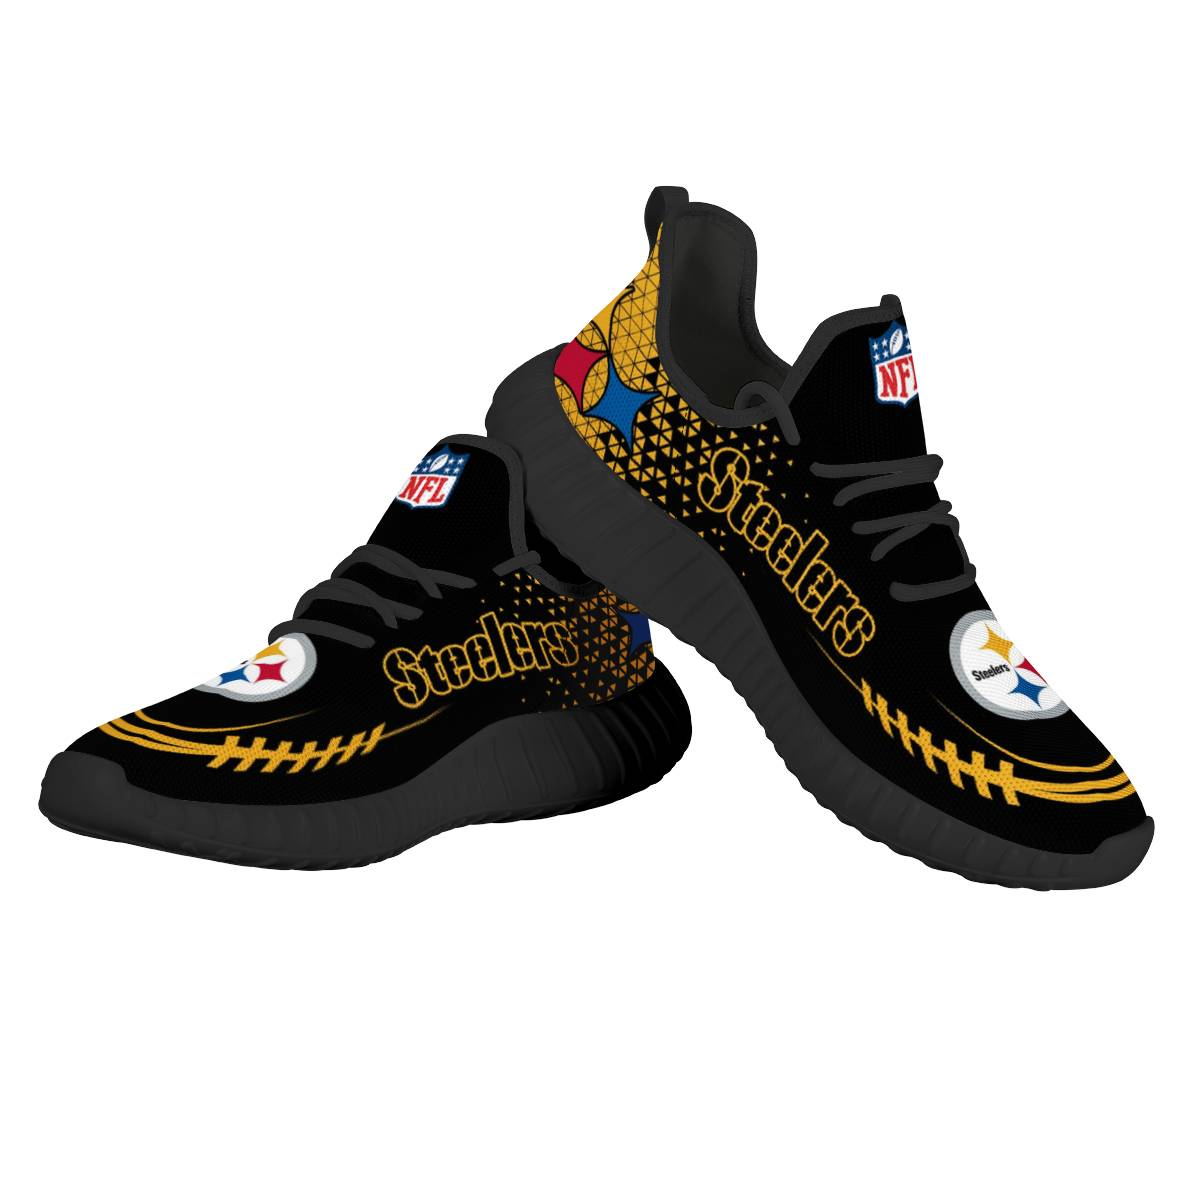 Men's NFL Pittsburgh Steelers Mesh Knit Sneakers/Shoes 011